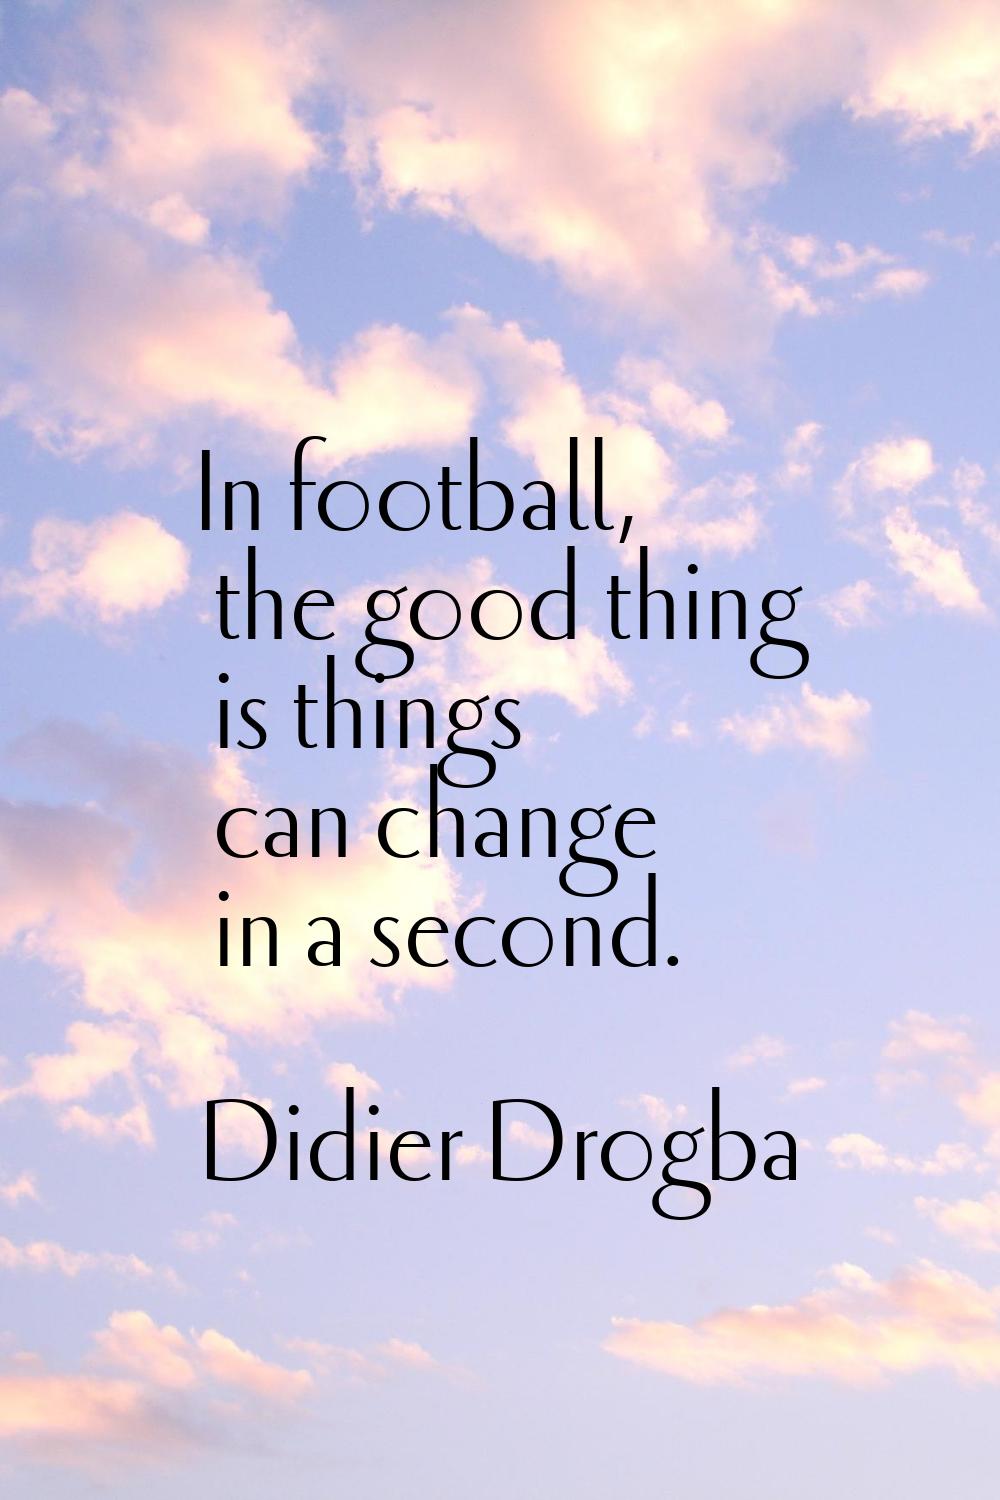 In football, the good thing is things can change in a second.